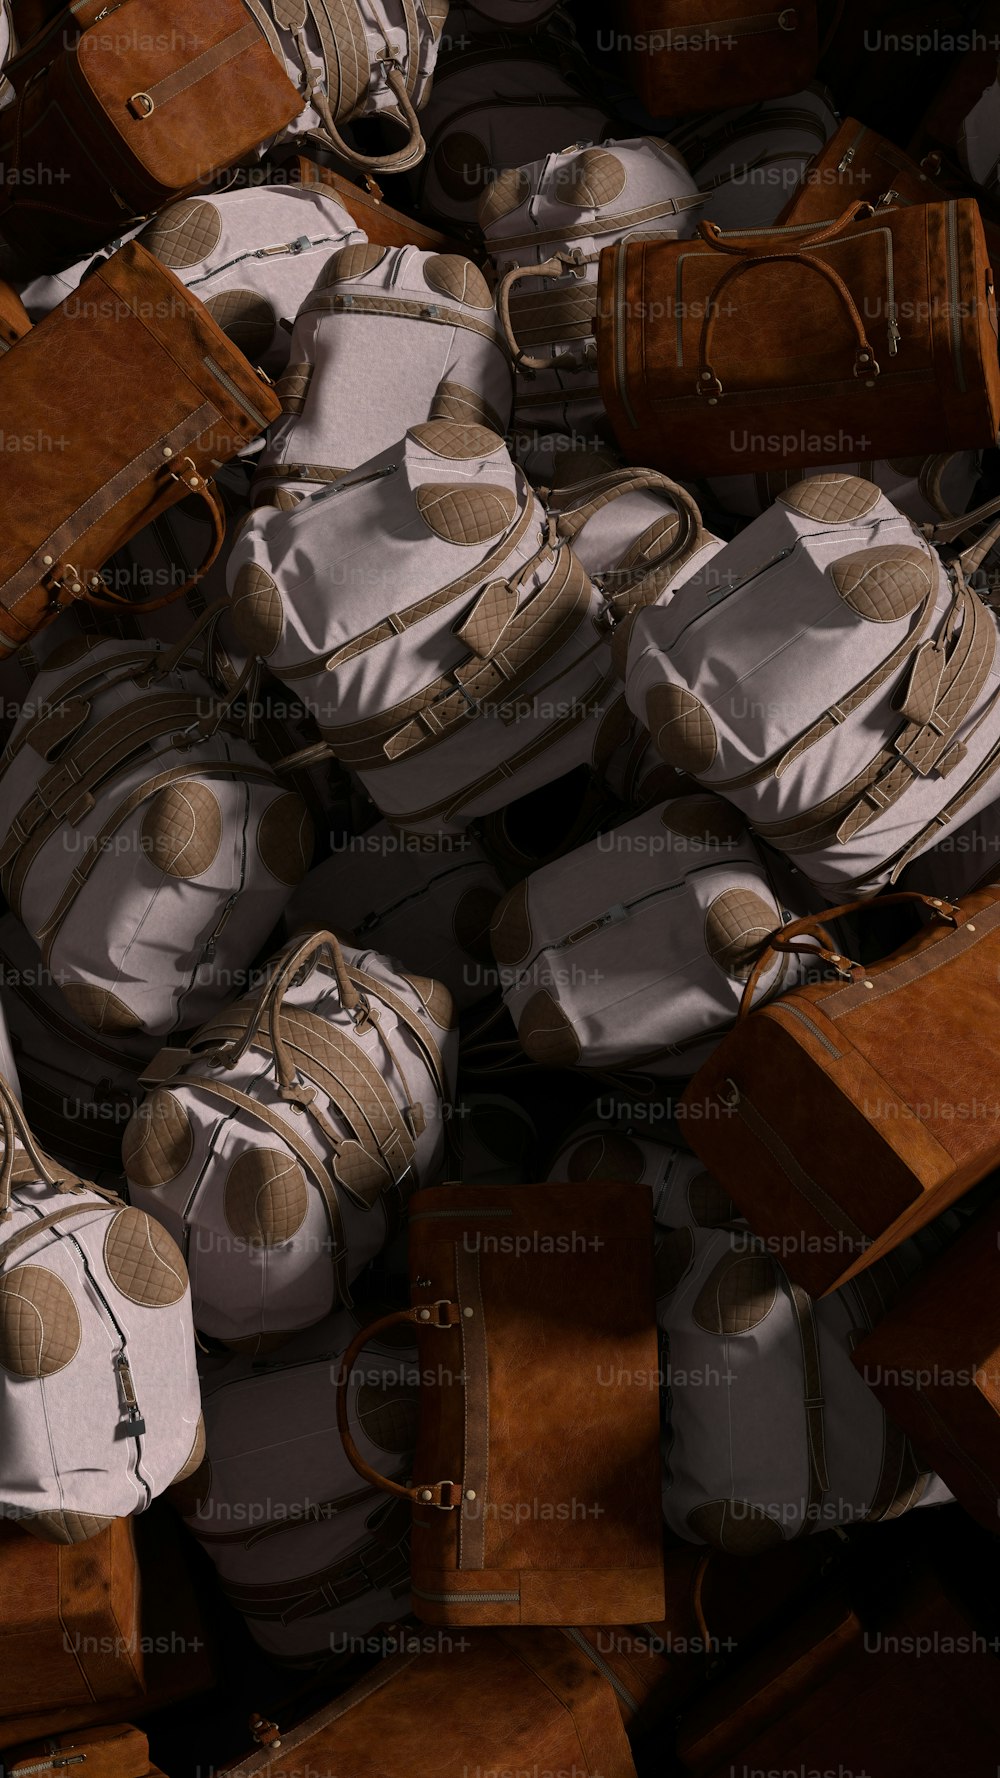 a pile of brown and white bags and suitcases